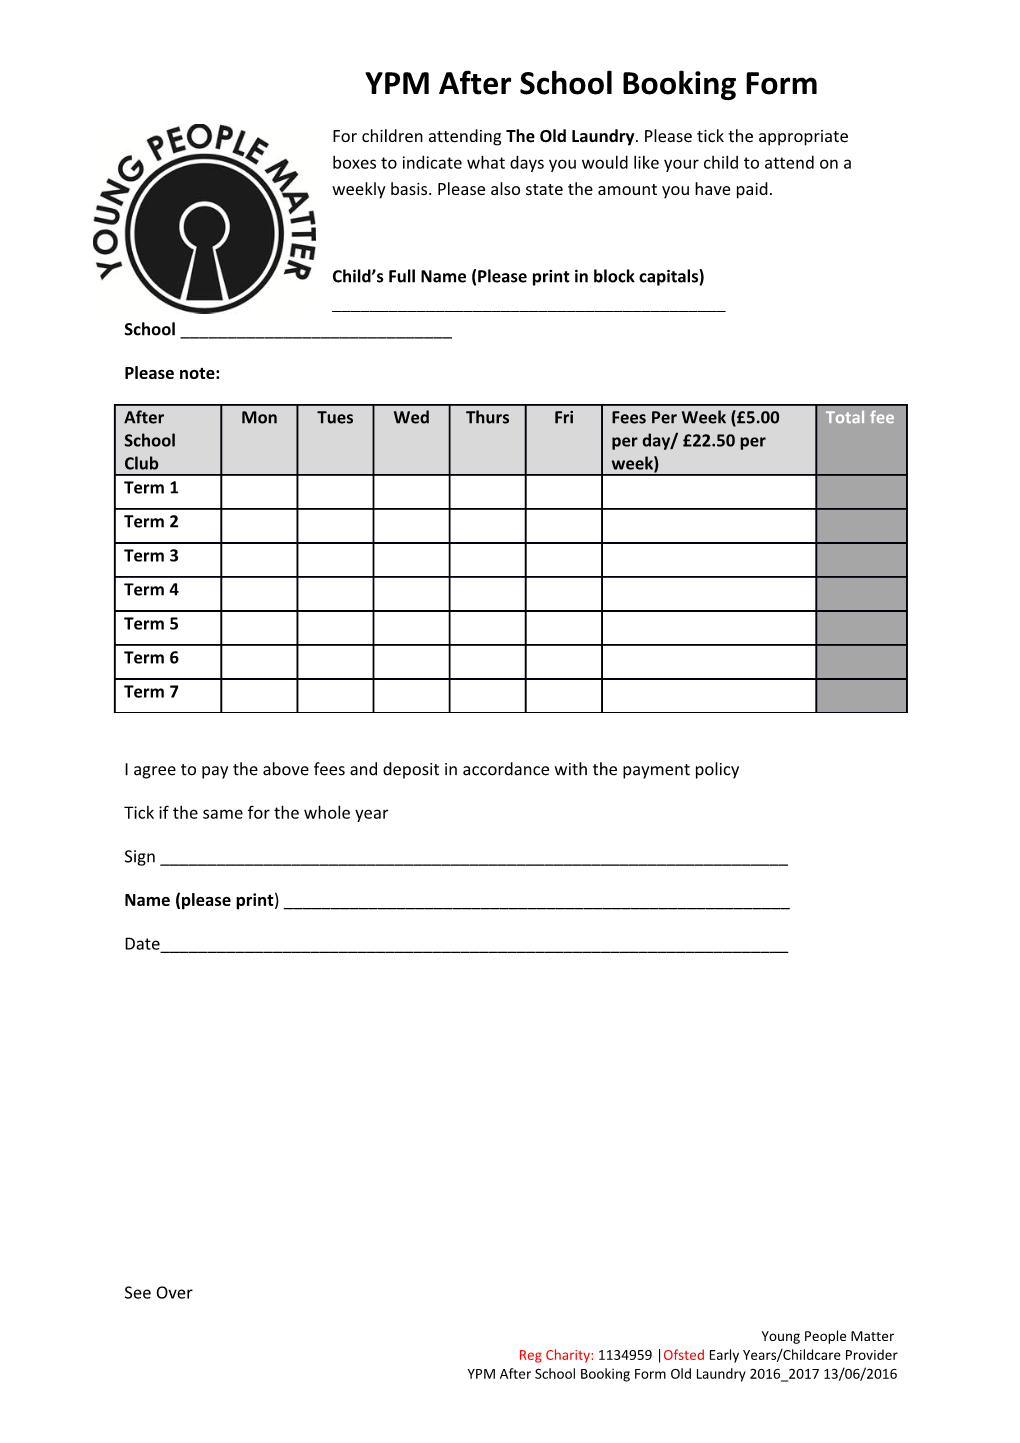 YPM After School Booking Form